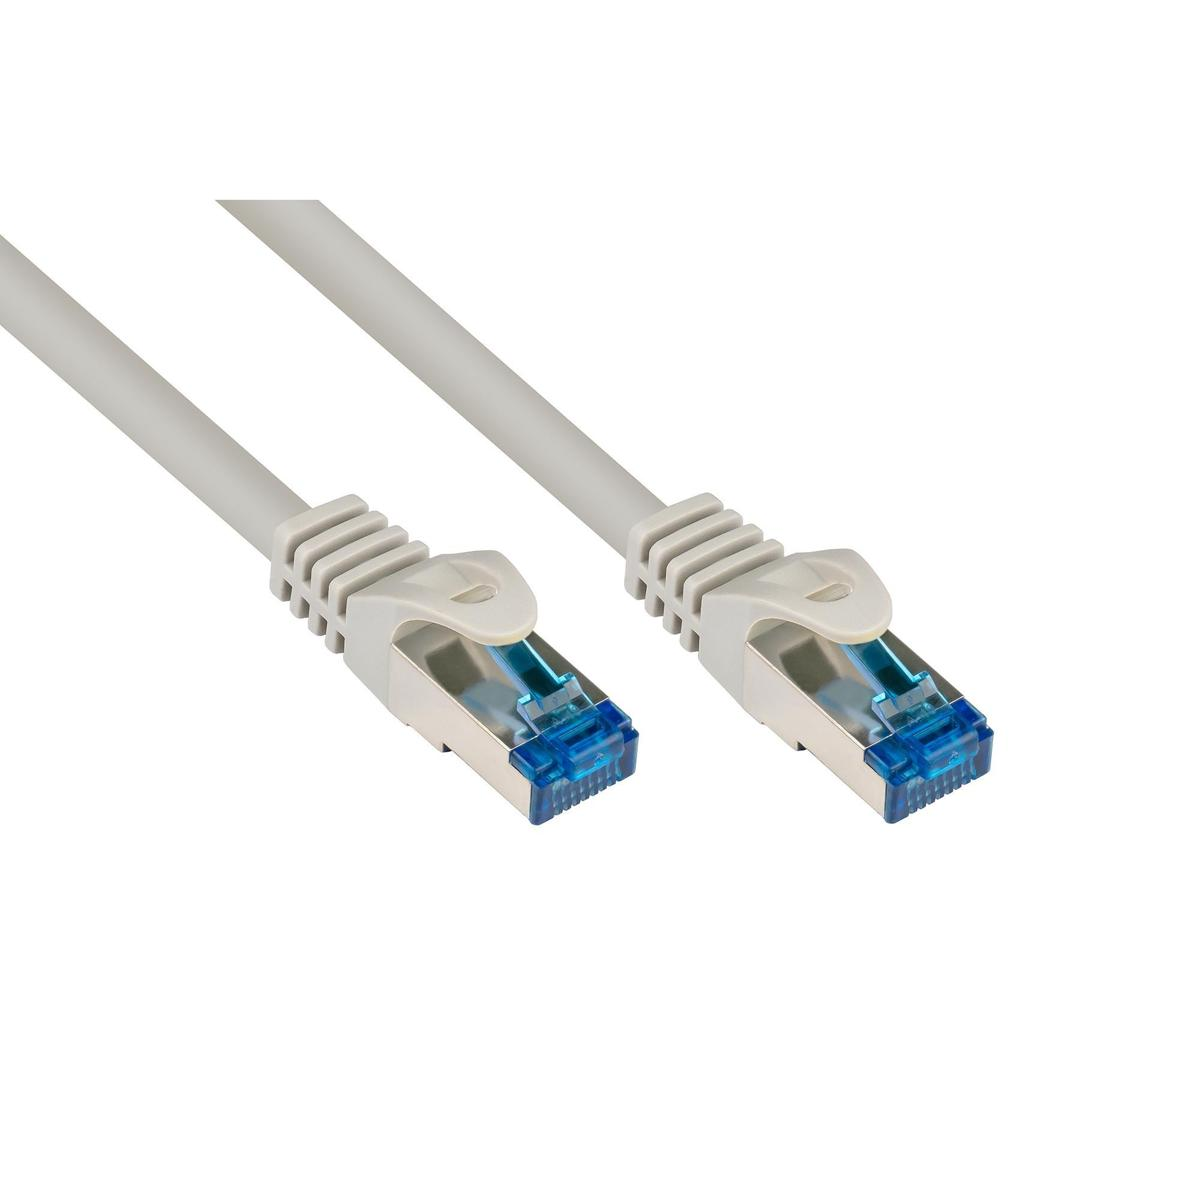 VARIA GROUP 8060-SF030 Cat.6a, Patchcable Grau